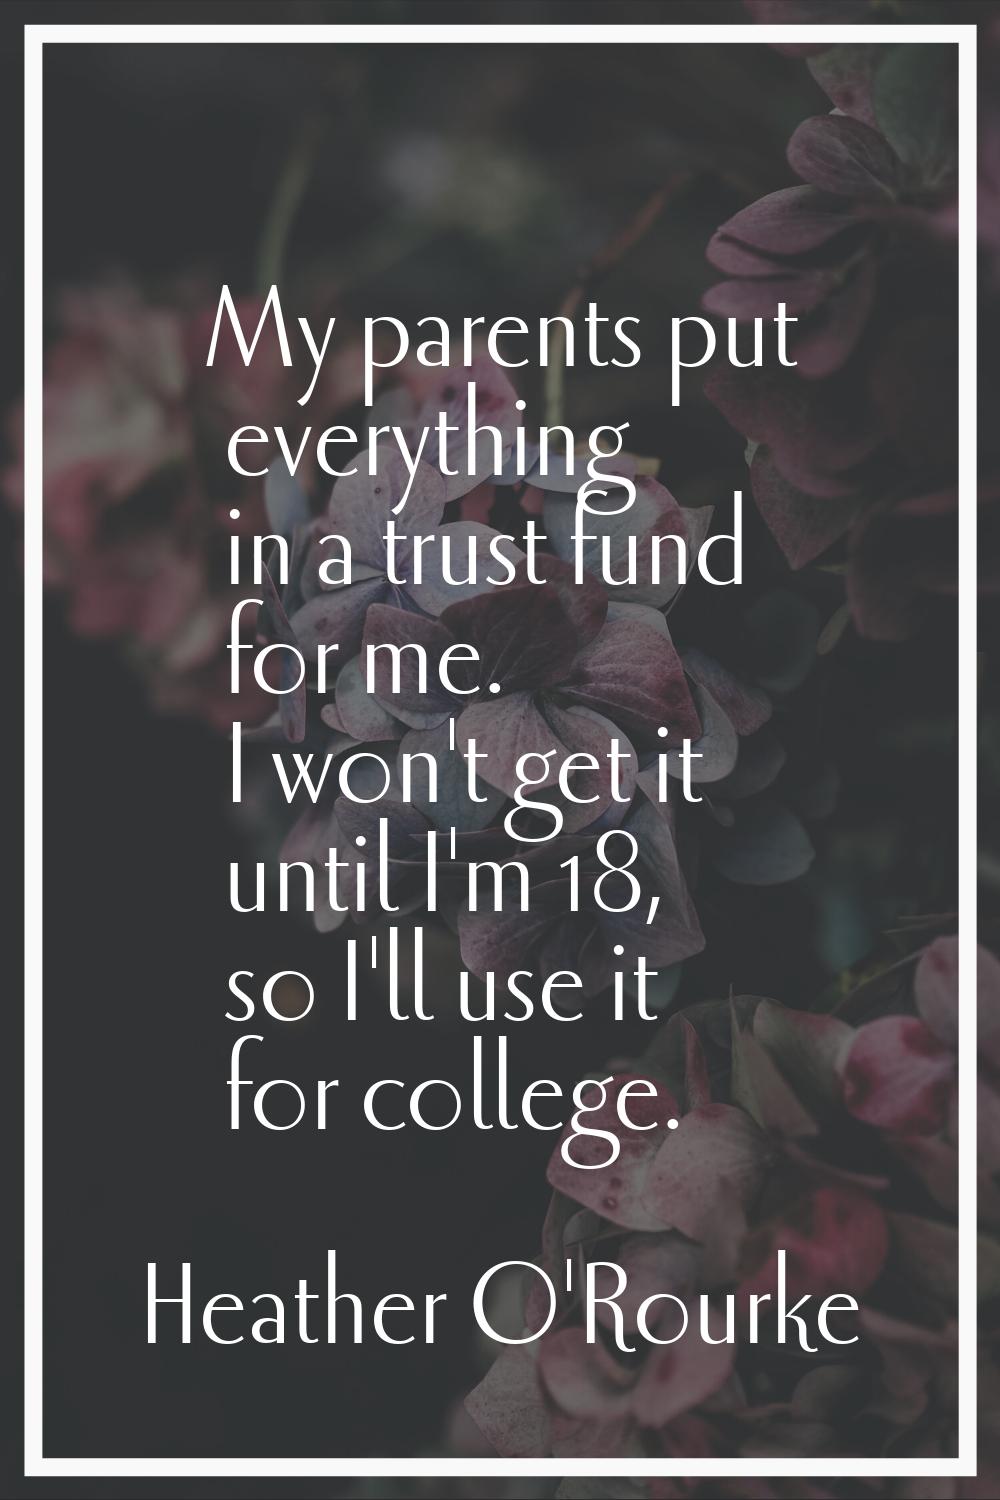 My parents put everything in a trust fund for me. I won't get it until I'm 18, so I'll use it for c